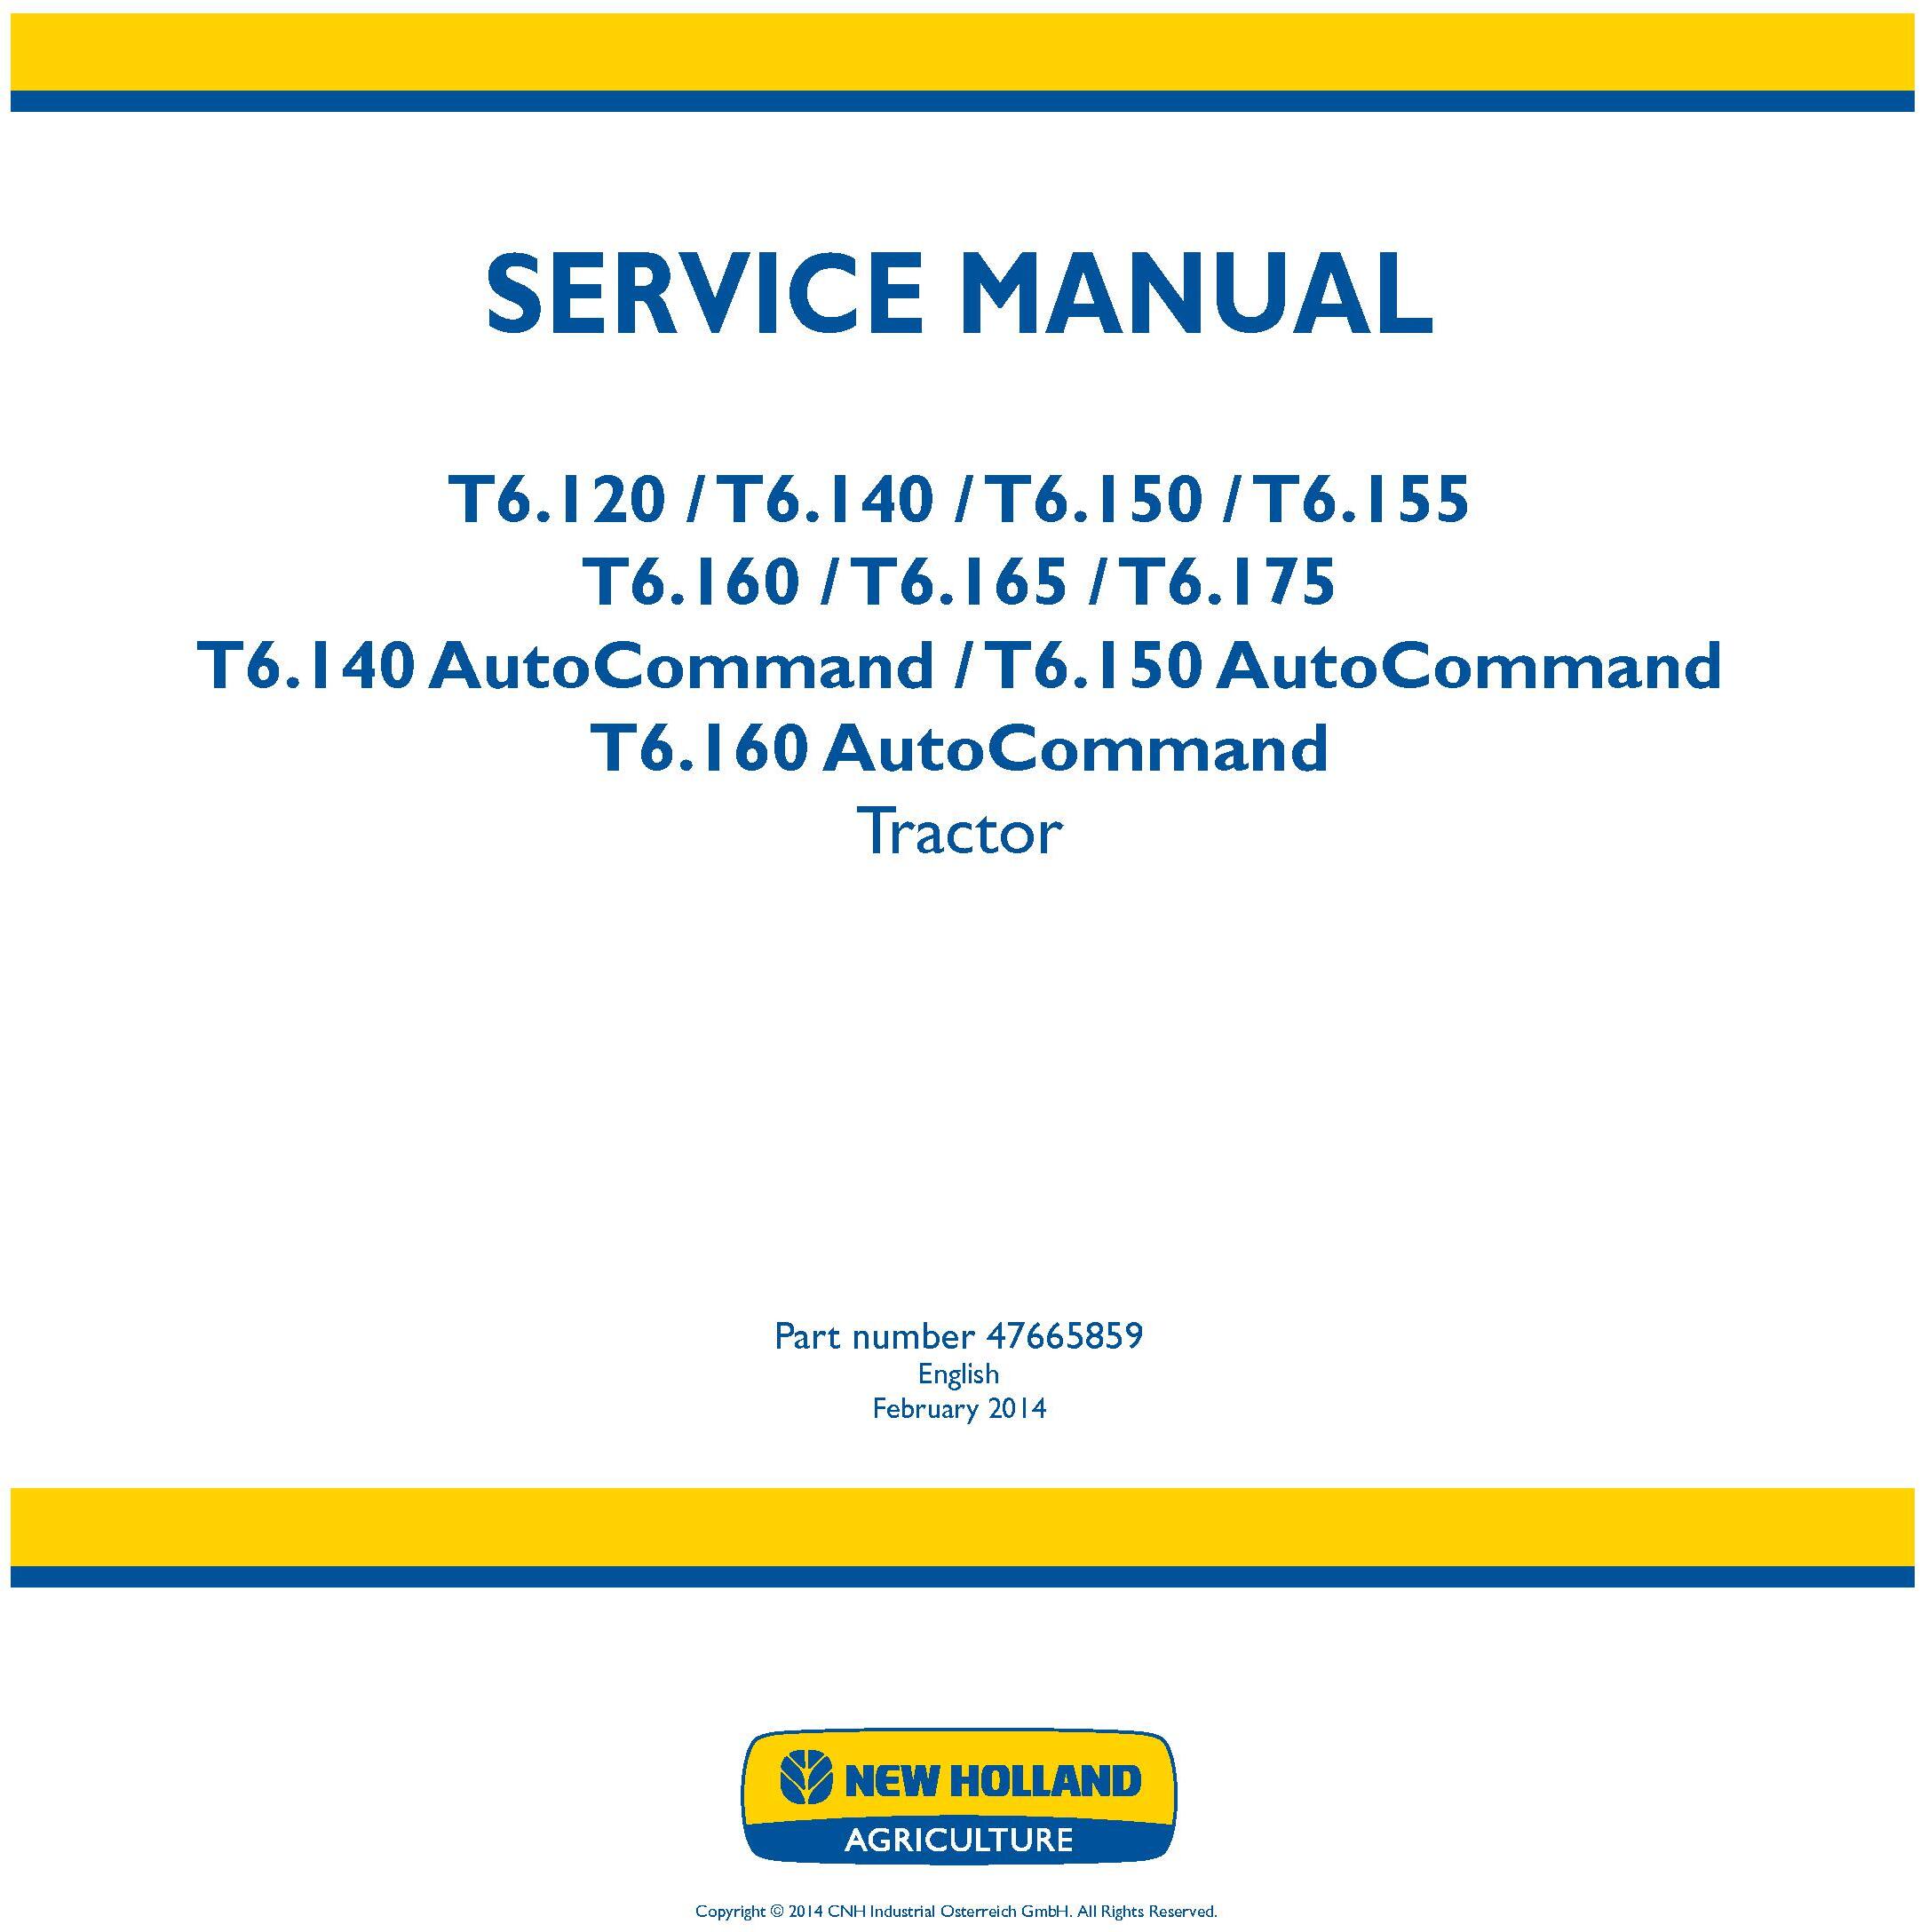 New Holland T6.120, T6.140, T6.150, T6.155, T6.160, T6.165, T6.175 European Tractor Service Manual - 19395